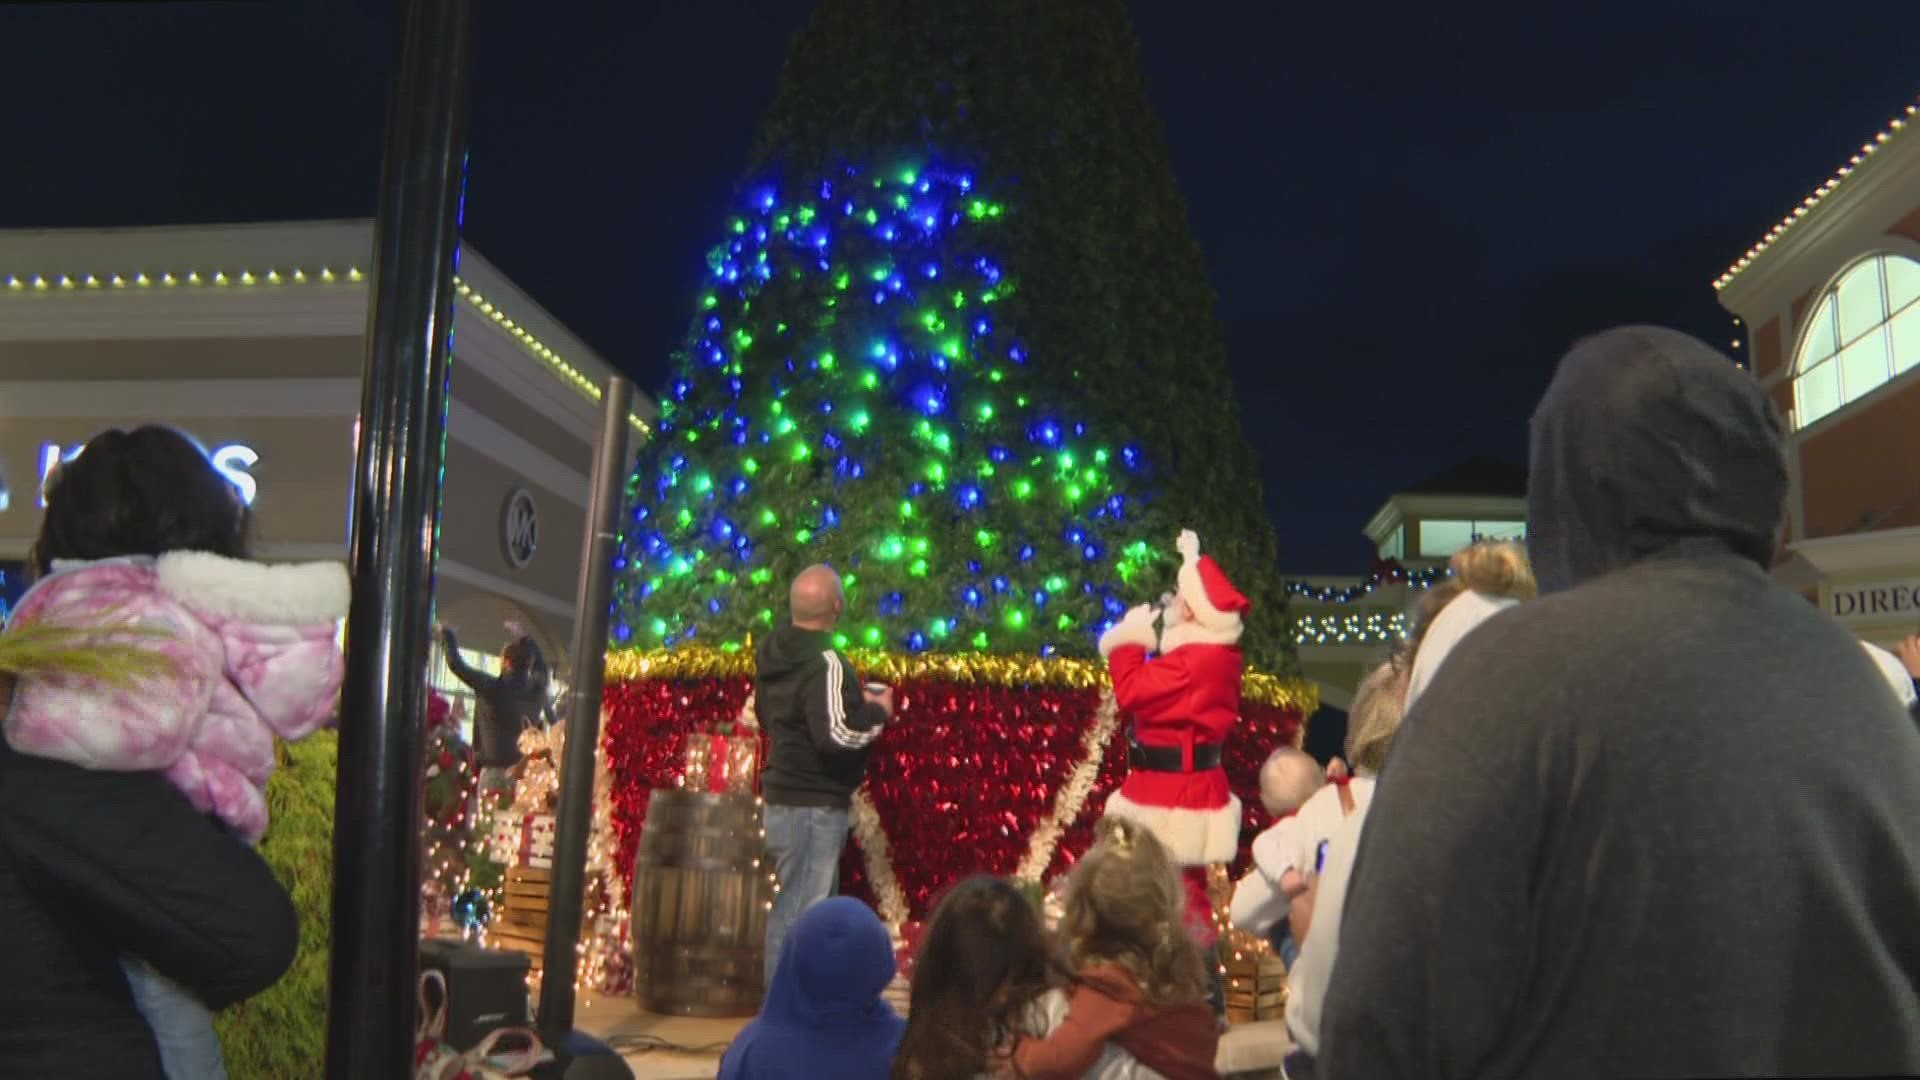 Shoppers were treated to music and fun Christmas activities, and got to take advantage of some sales.